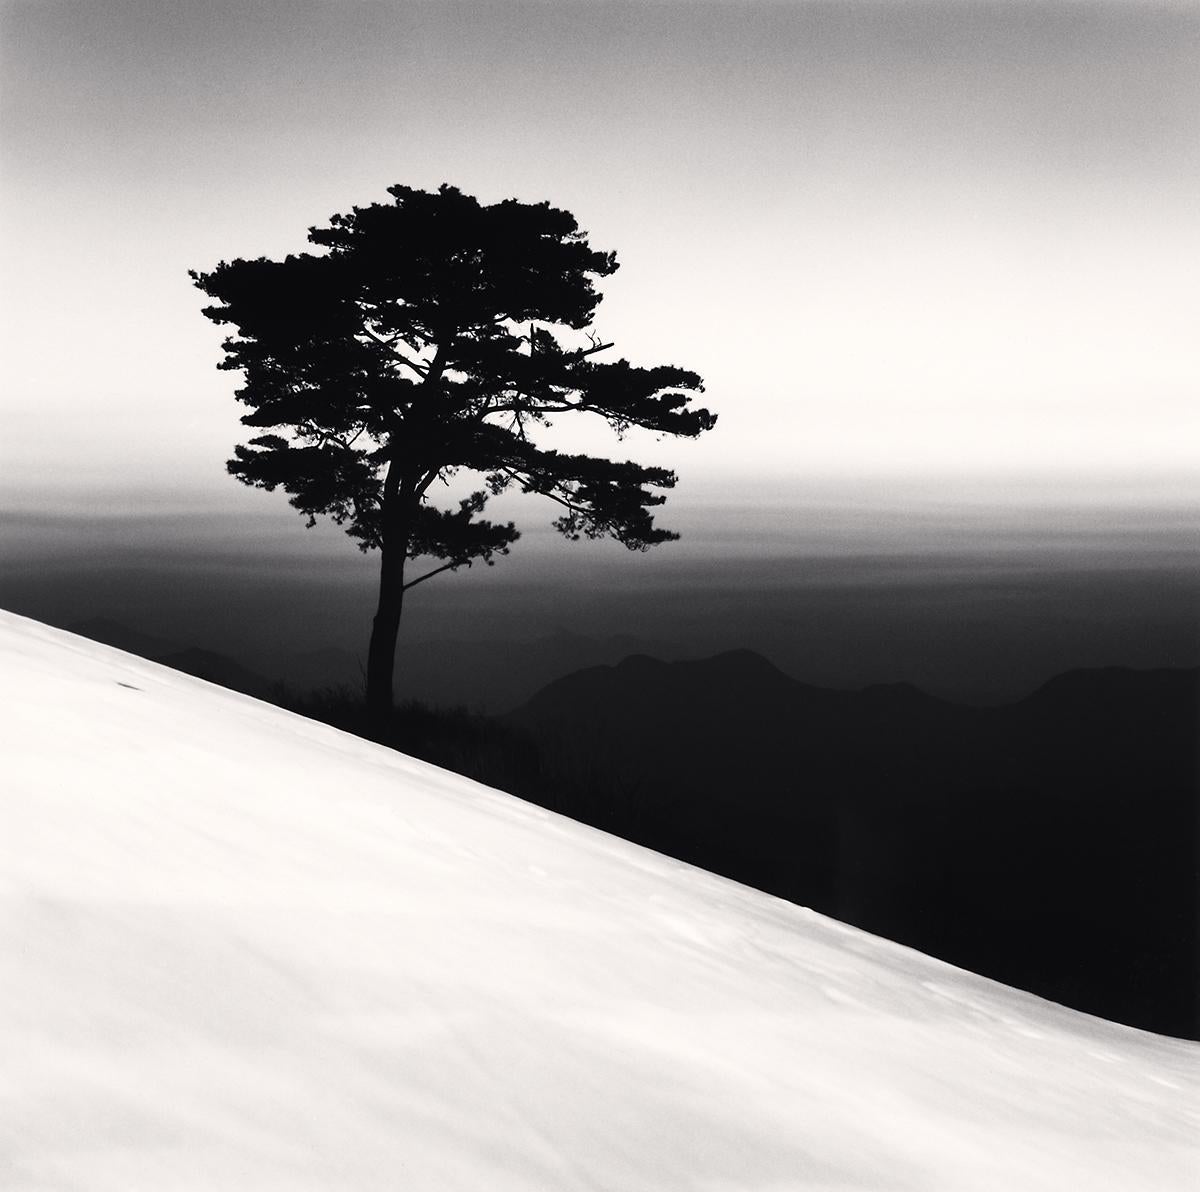 Mountain Tree, Study 1, Danyang, Chungcheongbukdo, South Korea by Michael Kenna presents a sublime scene. A lone tree stands tall, growing out from the side of the mountain. The stark white snow contrasts with the dark atmosphere in the distance.